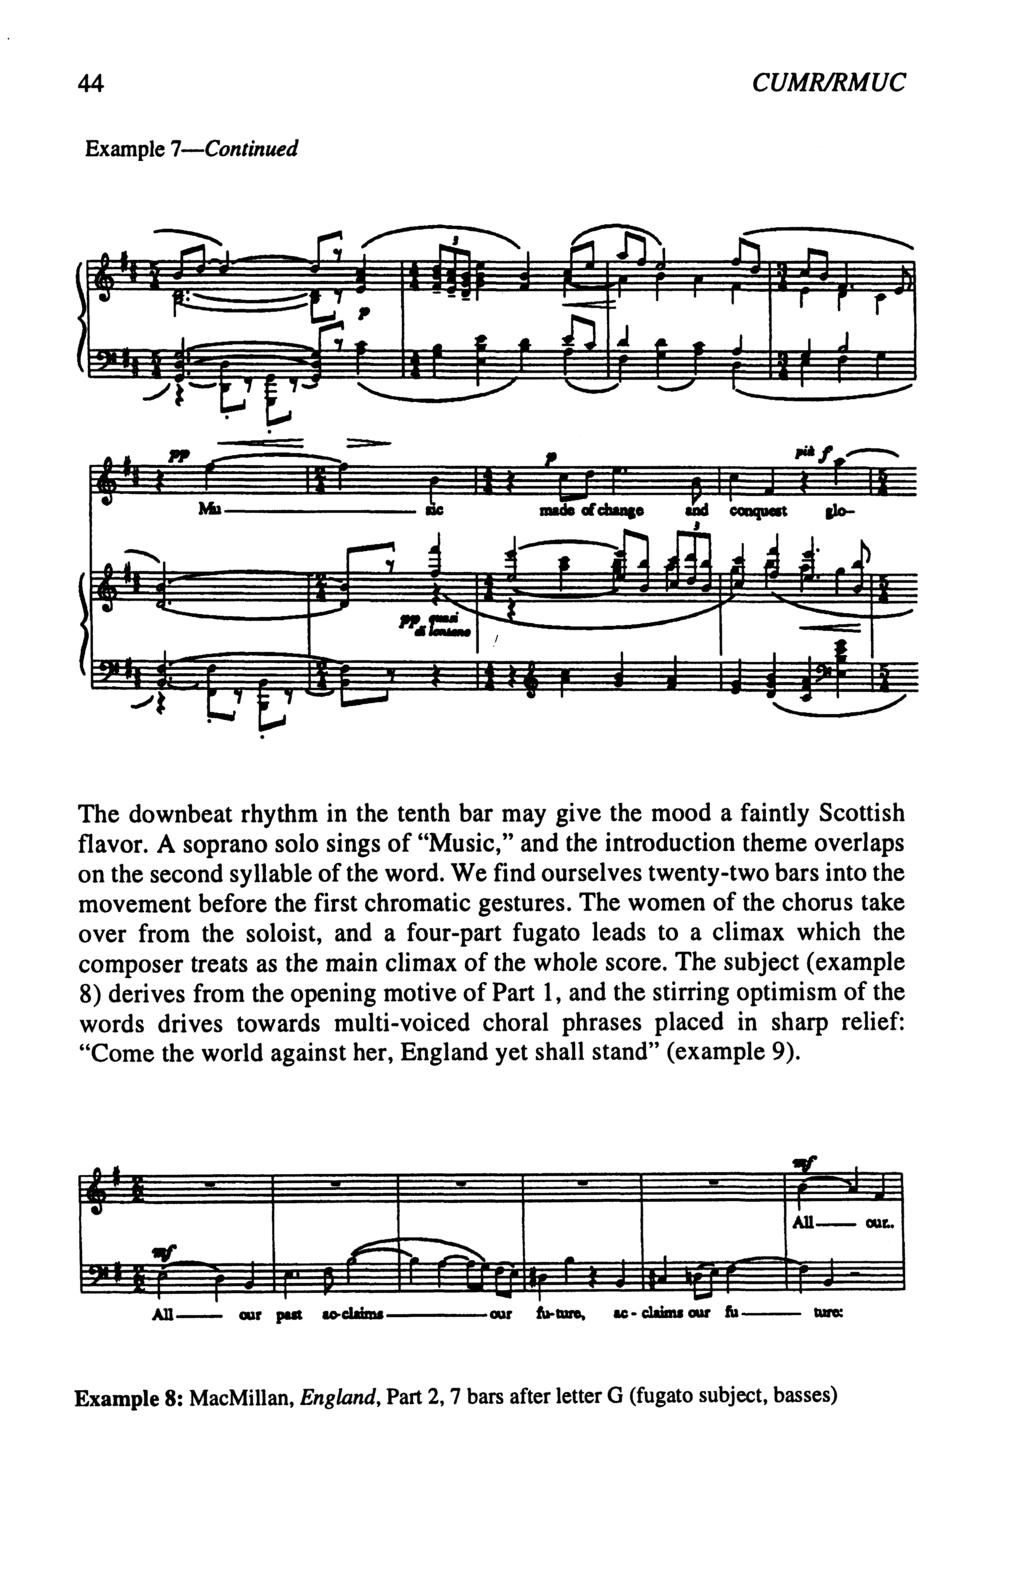 44 CUMR/RMUC Example 7 Continued The downbeat rhythm in the tenth bar may give the mood a faintly Scottish flavor.